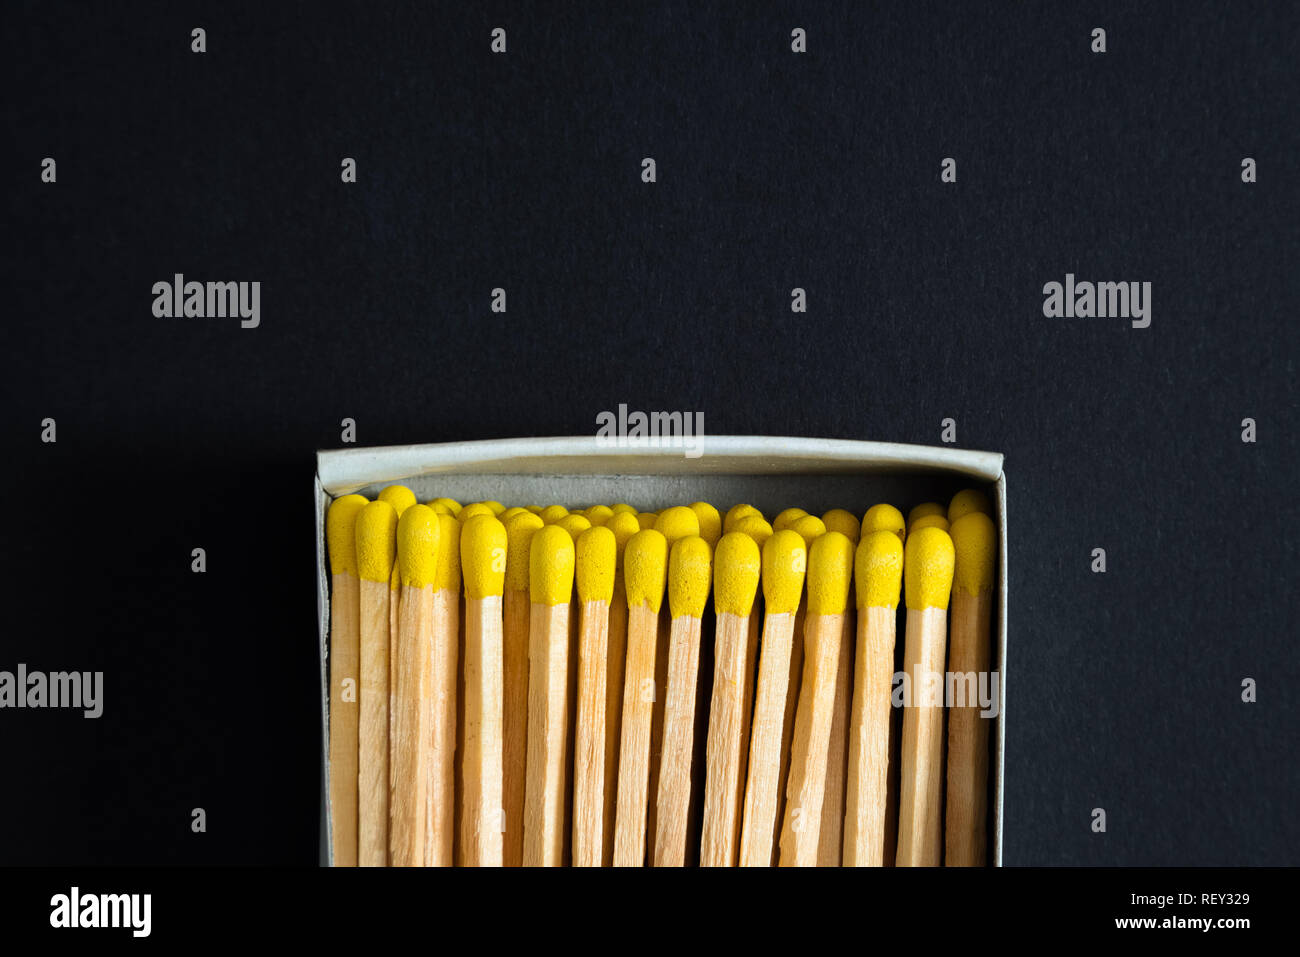 Matches with yellow heads in a box, dark background. Macro photography. Matches in open match-box Stock Photo